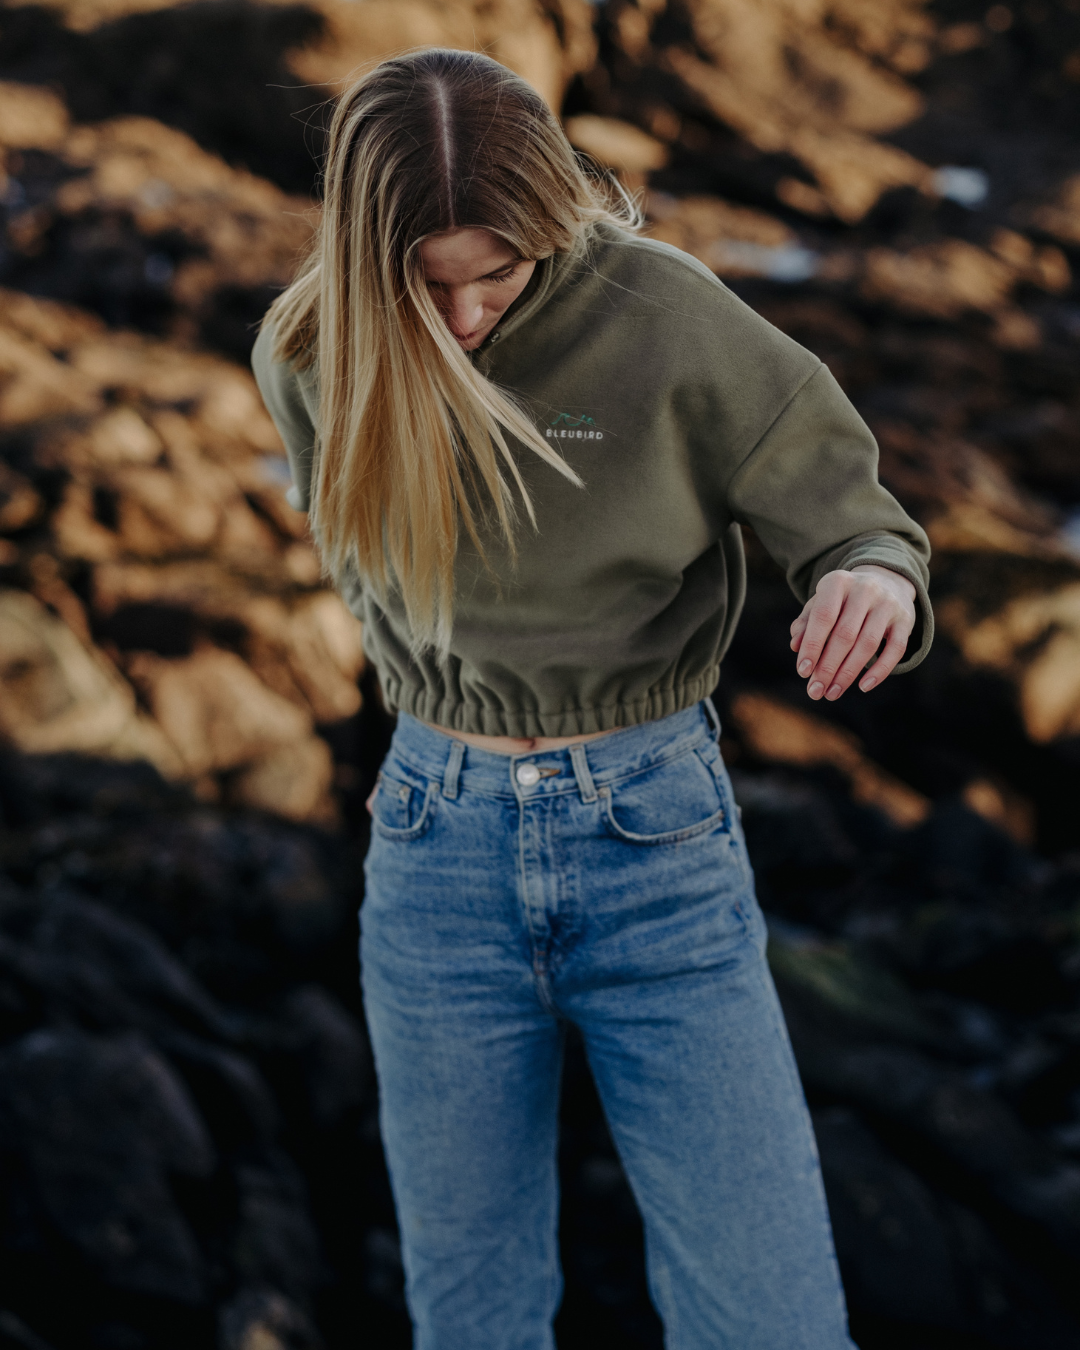 Recycled Cropped Fleece - Olive